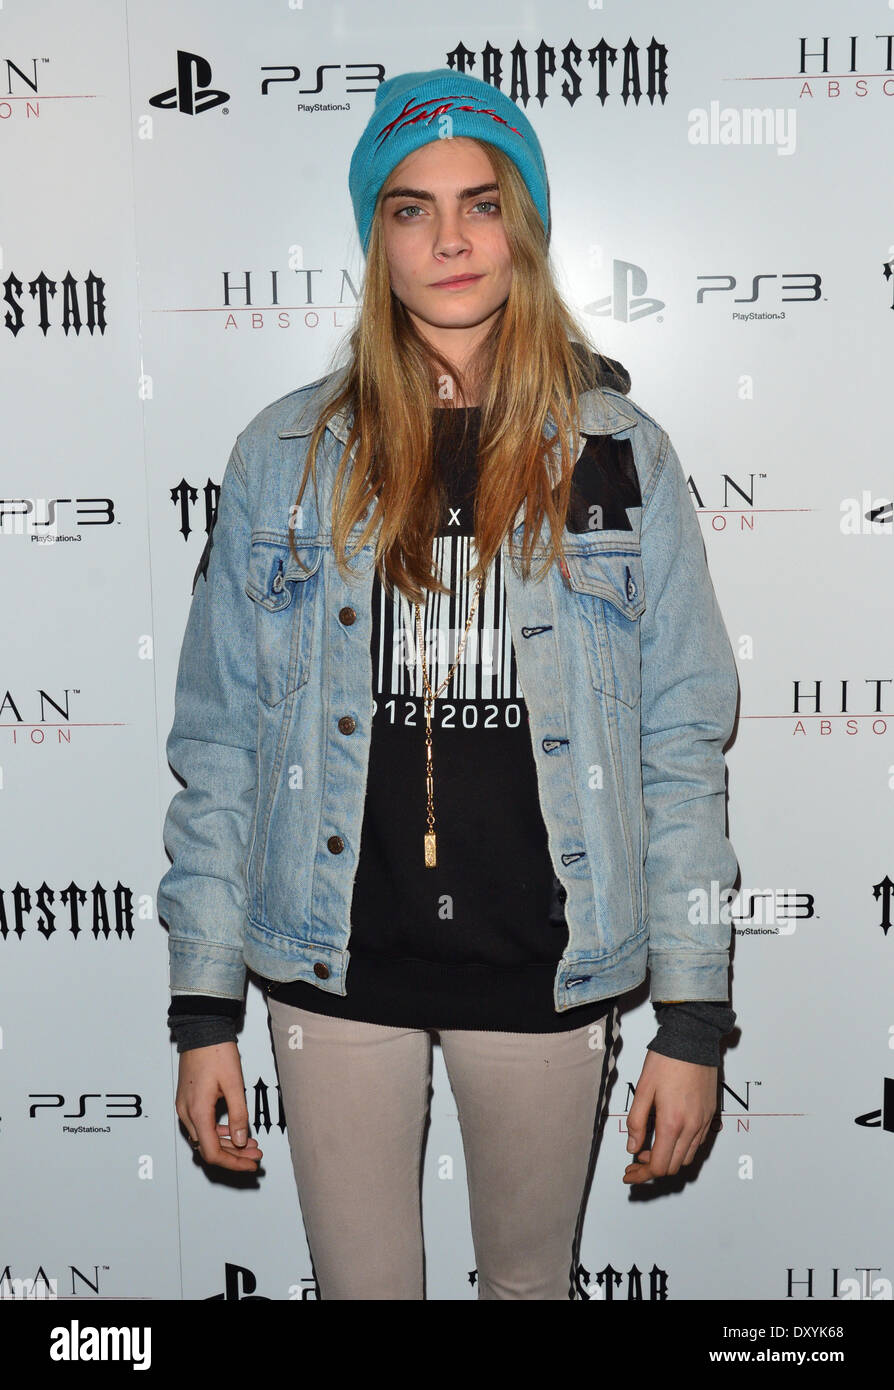 The Trapstar X Hitman Launch party held at Concrete Featuring: Cara Delevingne Where: London England When: 19 Nov 2012 Stock Photo